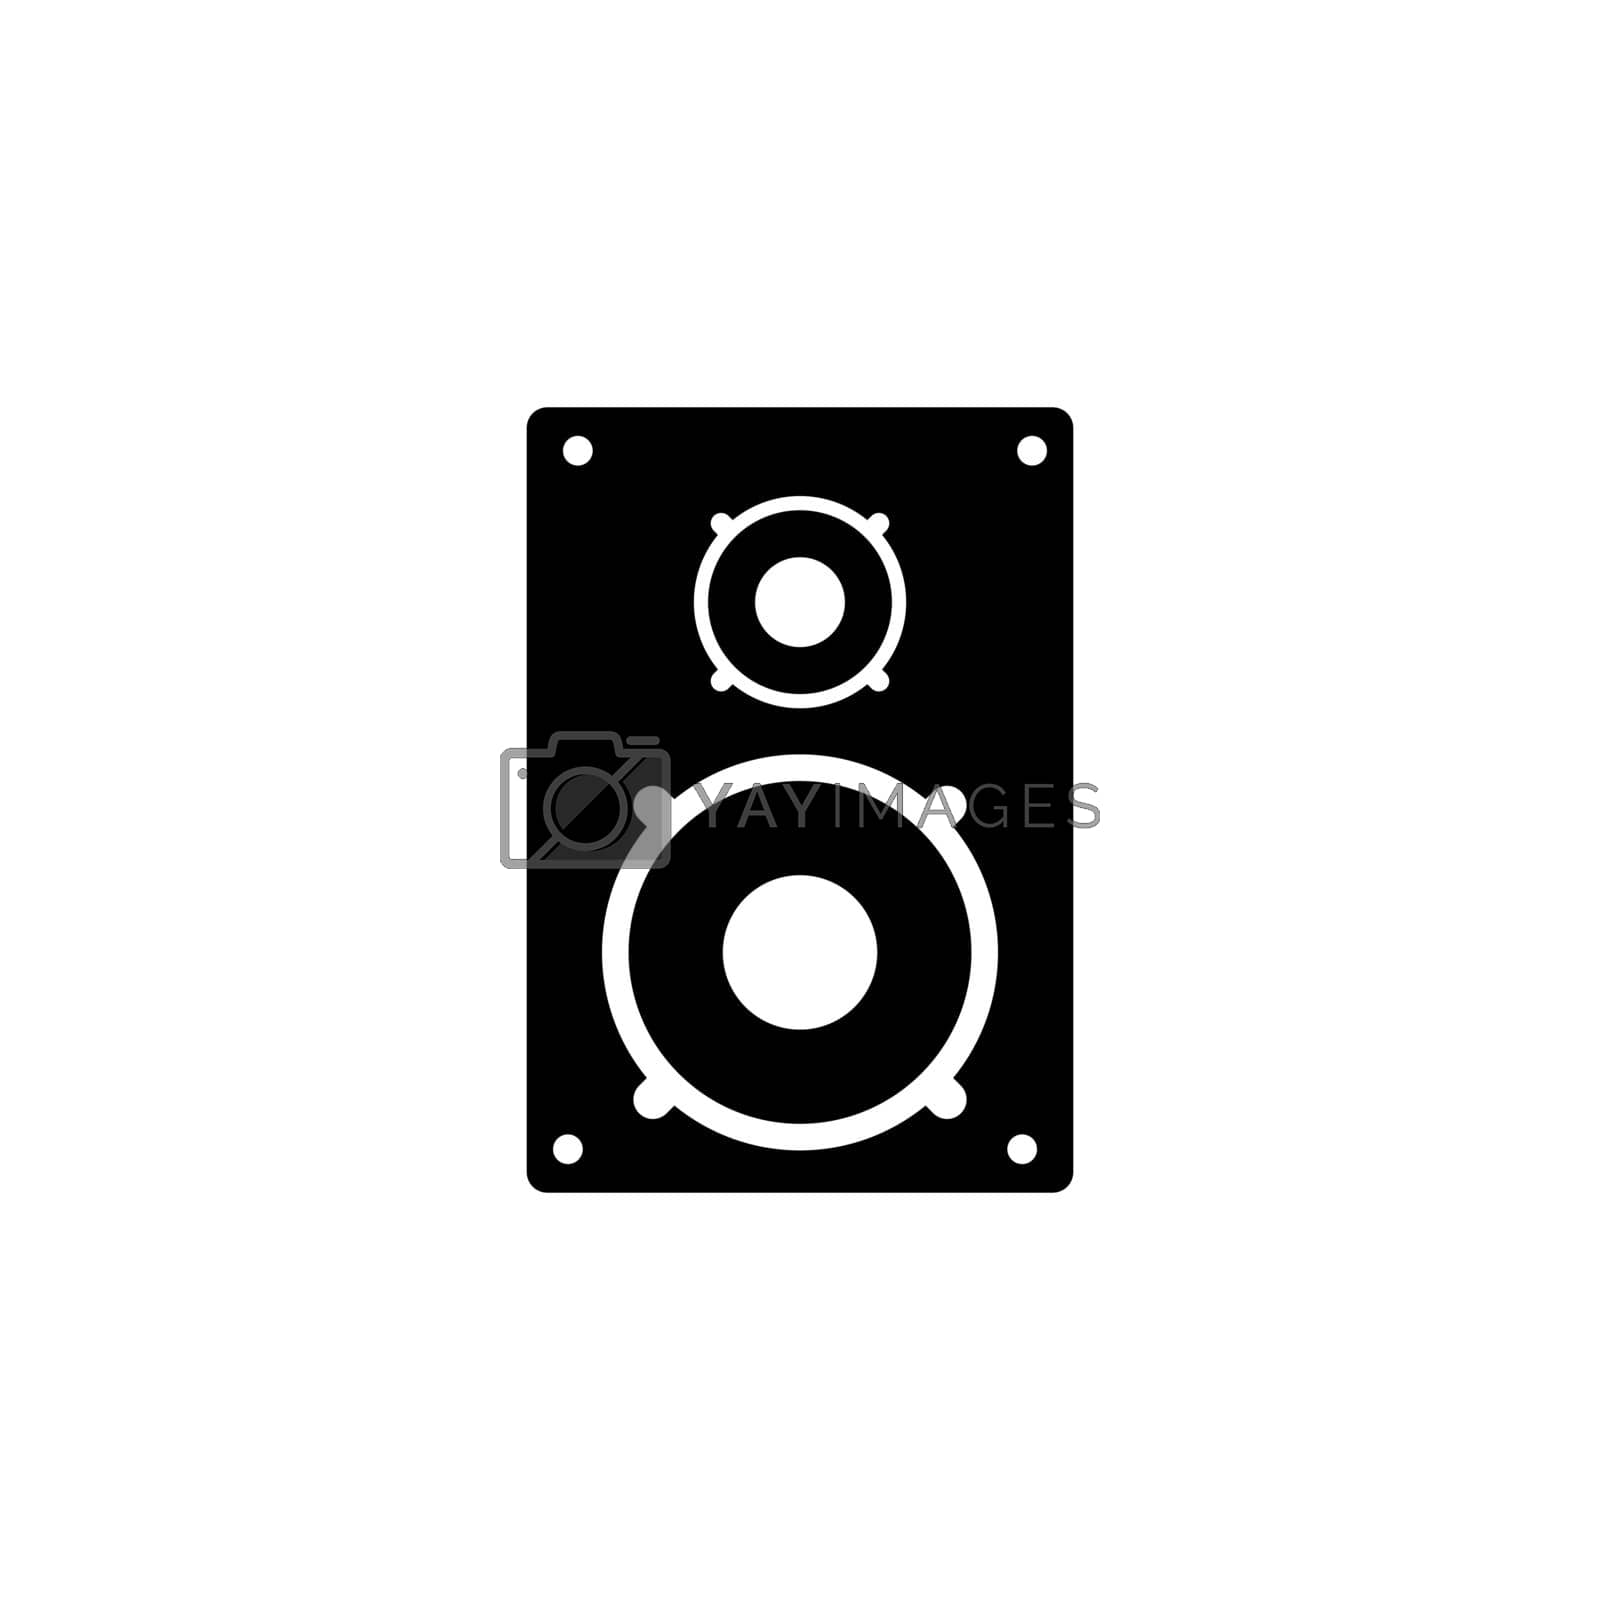 Royalty free image of Music Column, Audio Stereo Speaker. Flat Vector Icon illustration. Simple black symbol on white background. Music Column, Audio Stereo Speaker sign design template for web and mobile UI element. by sfinks